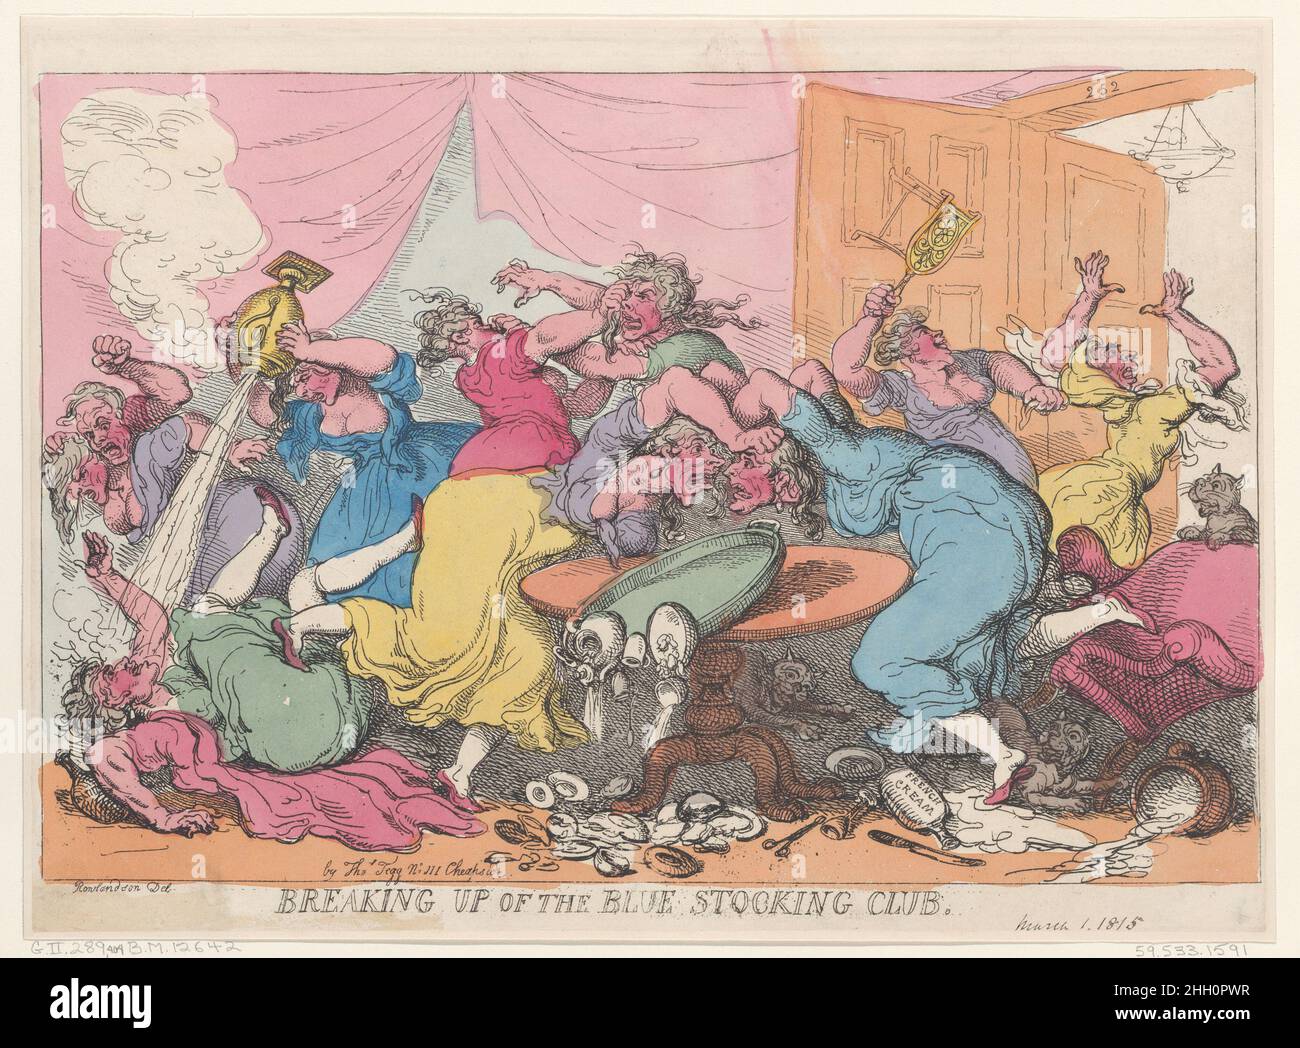 Breaking Up of the Blue Stocking Club March 1, 1815 Thomas Rowlandson Five pairs of women brawl over a tea table at center. Teacups have fallen to the floor and broken while the women are in combat. Three cats add to the uproar.. Breaking Up of the Blue Stocking Club. Thomas Rowlandson (British, London 1757–1827 London). March 1, 1815. Hand-colored etching. Thomas Tegg (British, 1776–1846). Prints Stock Photo